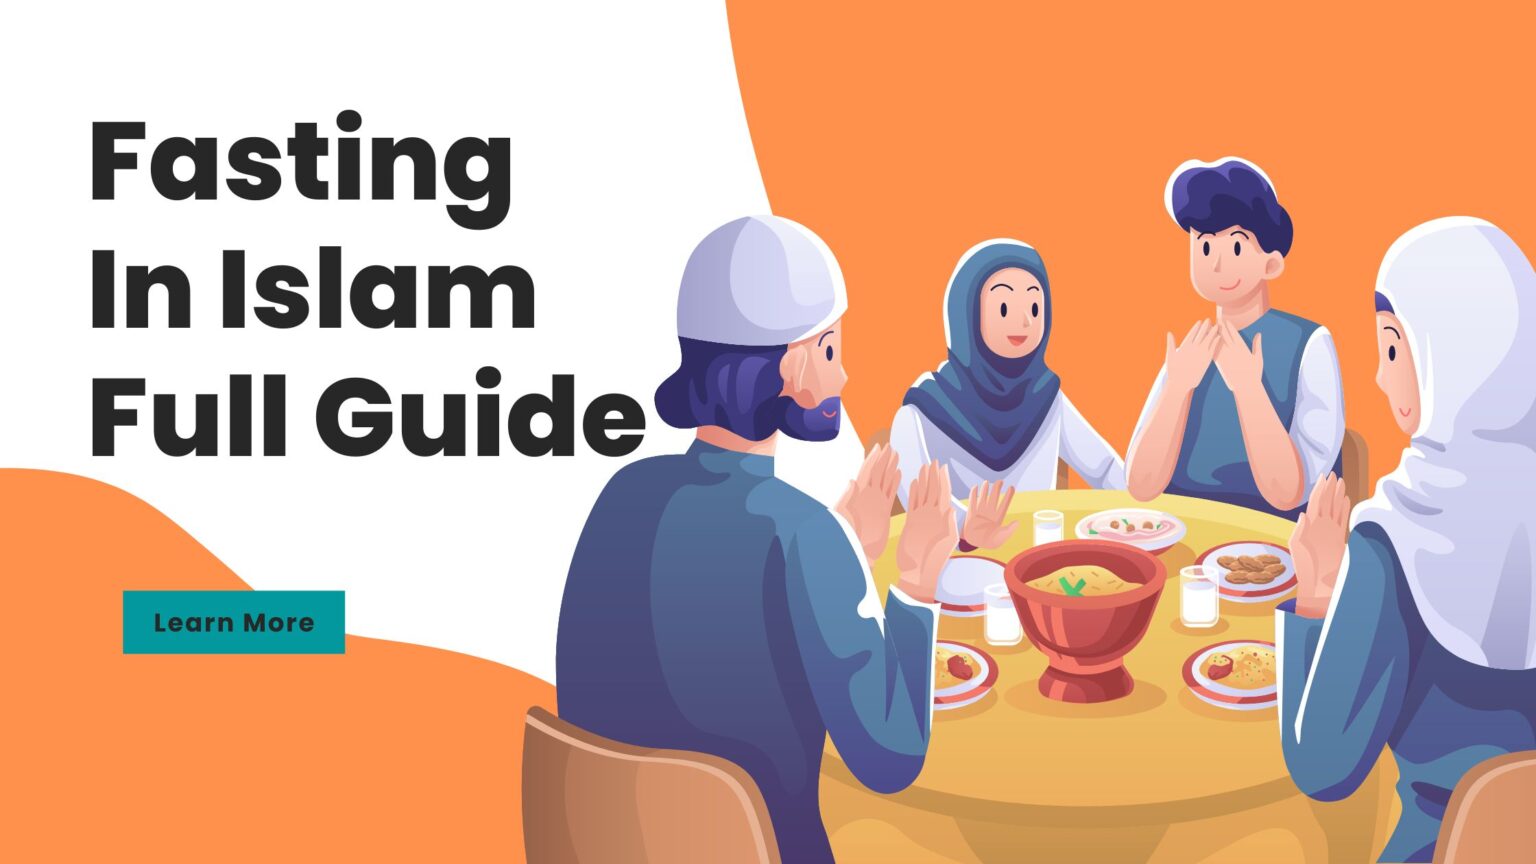 What Are The Types, Purposes, And Benefits Of Fasting In Islam